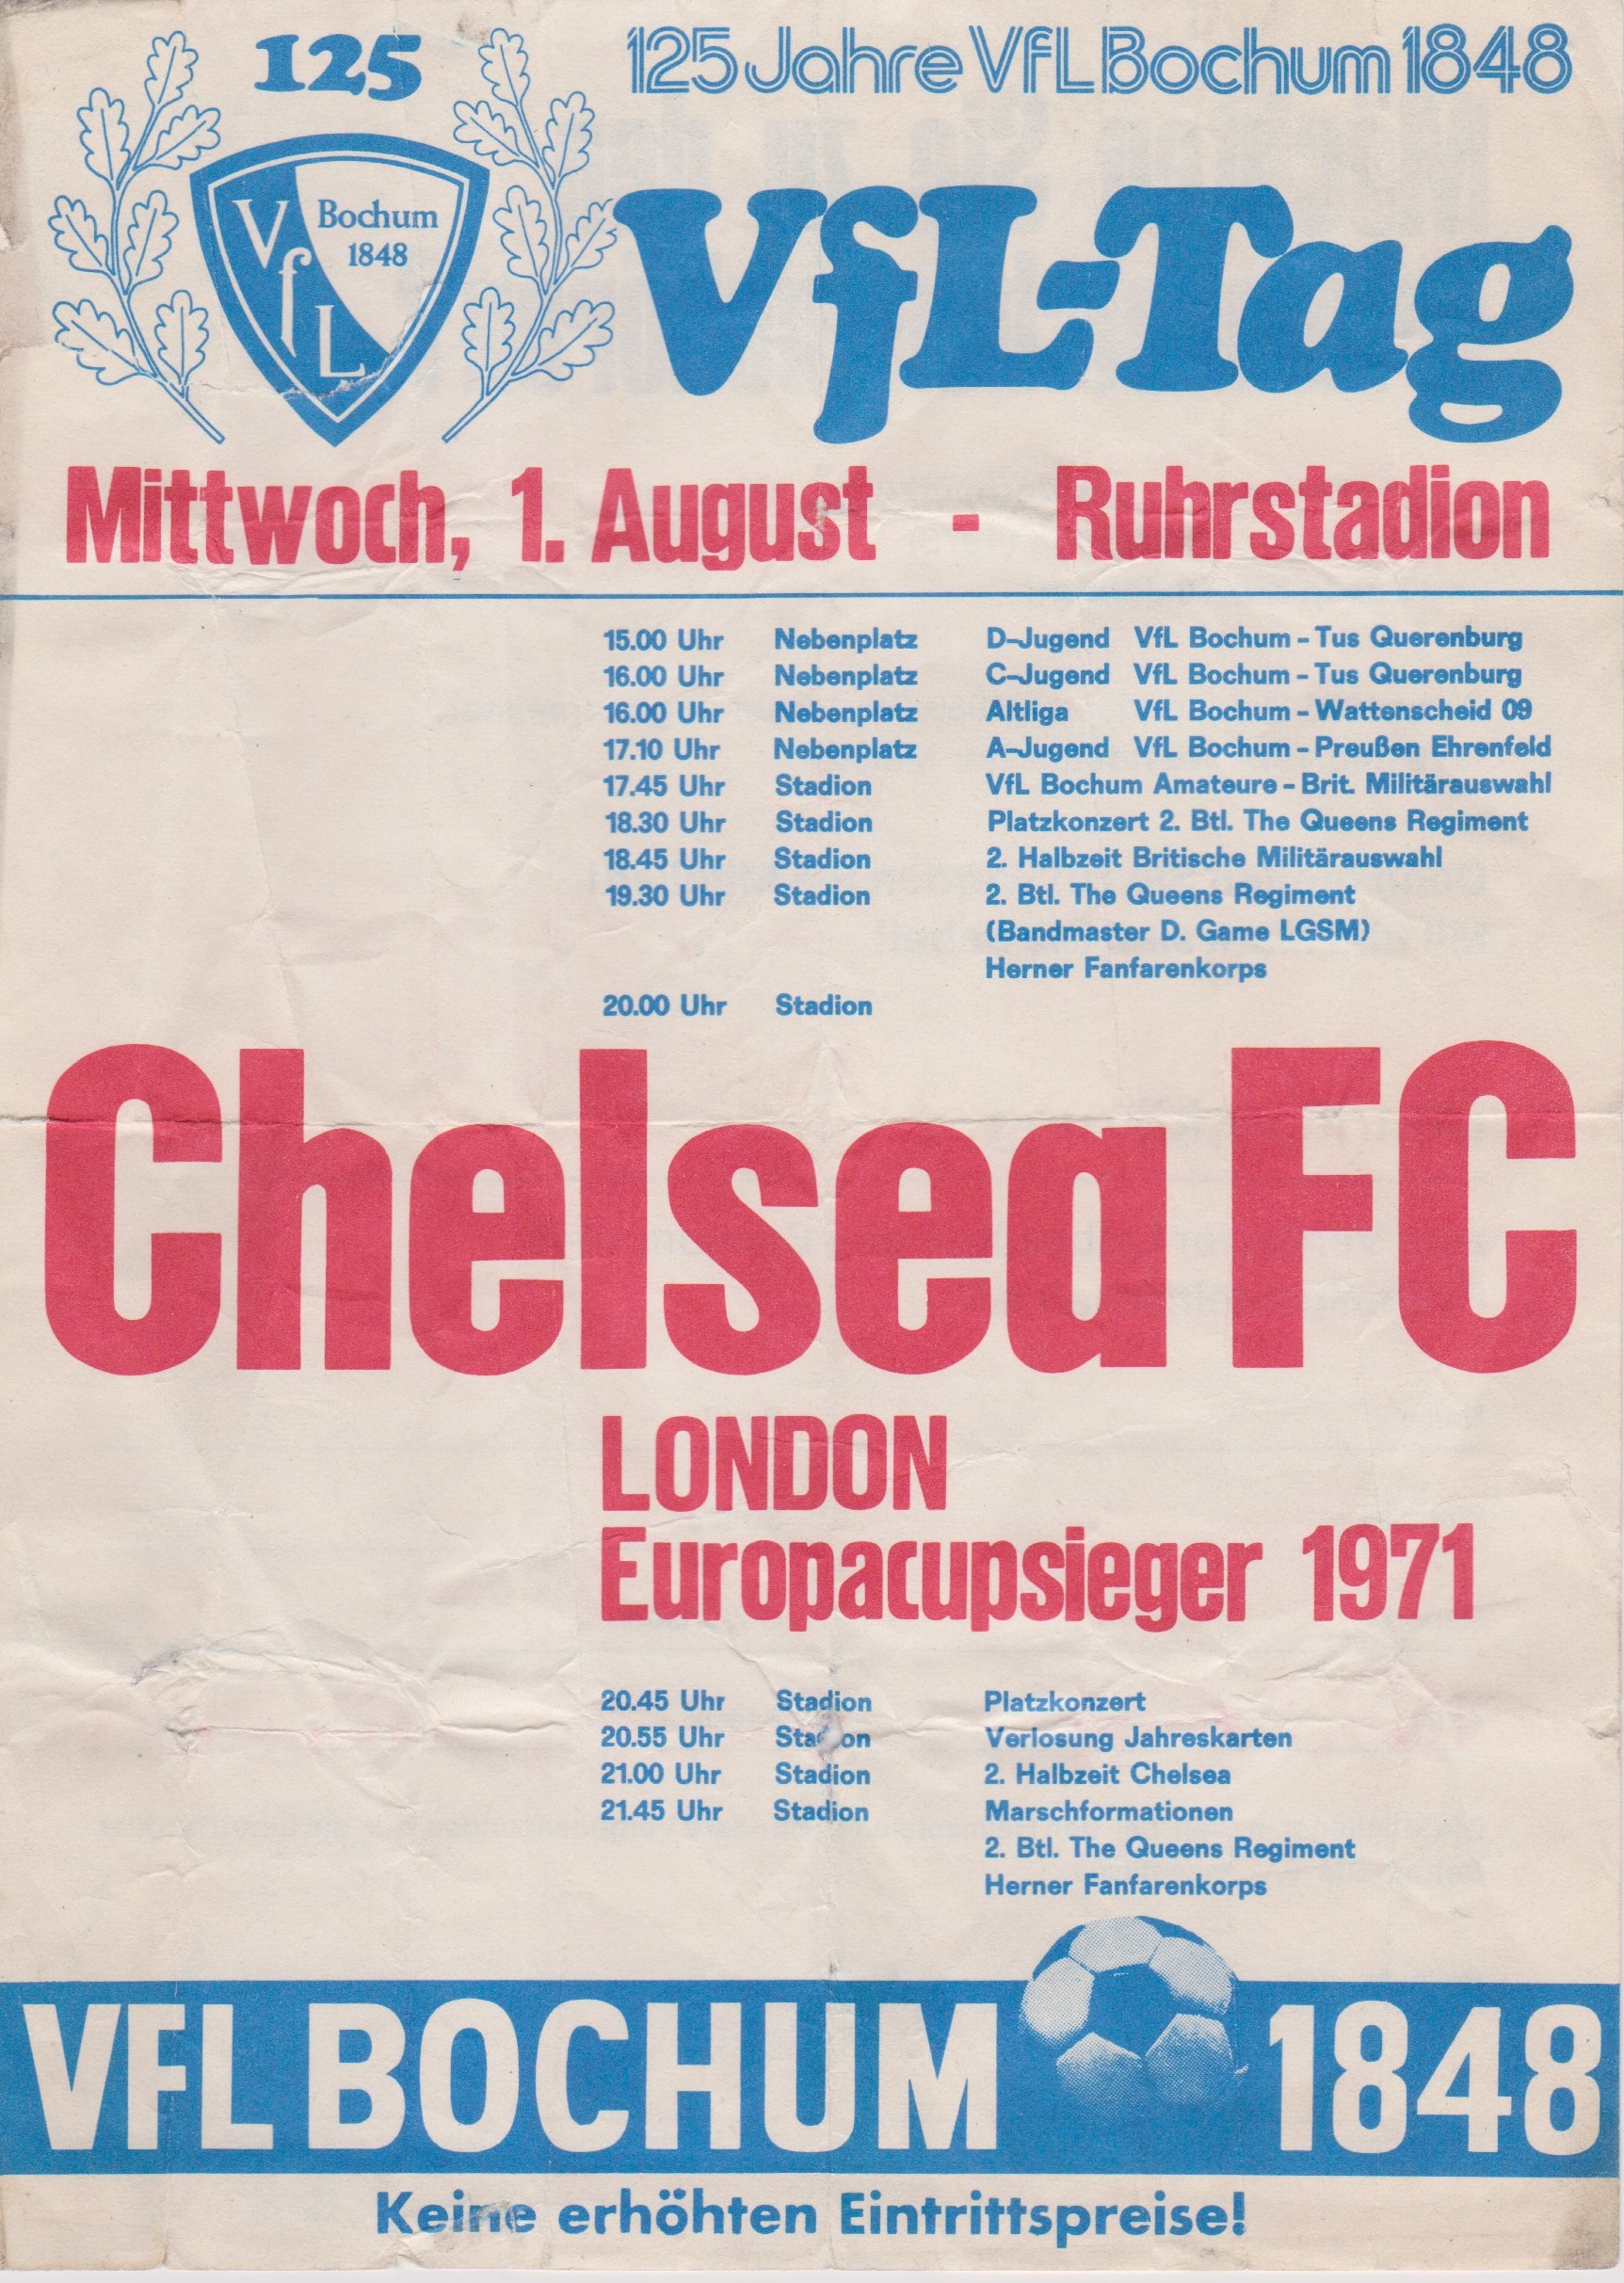 Flyer for the no programme friendly match between VFL Bochum and Chelsea 1st August 1973. This is